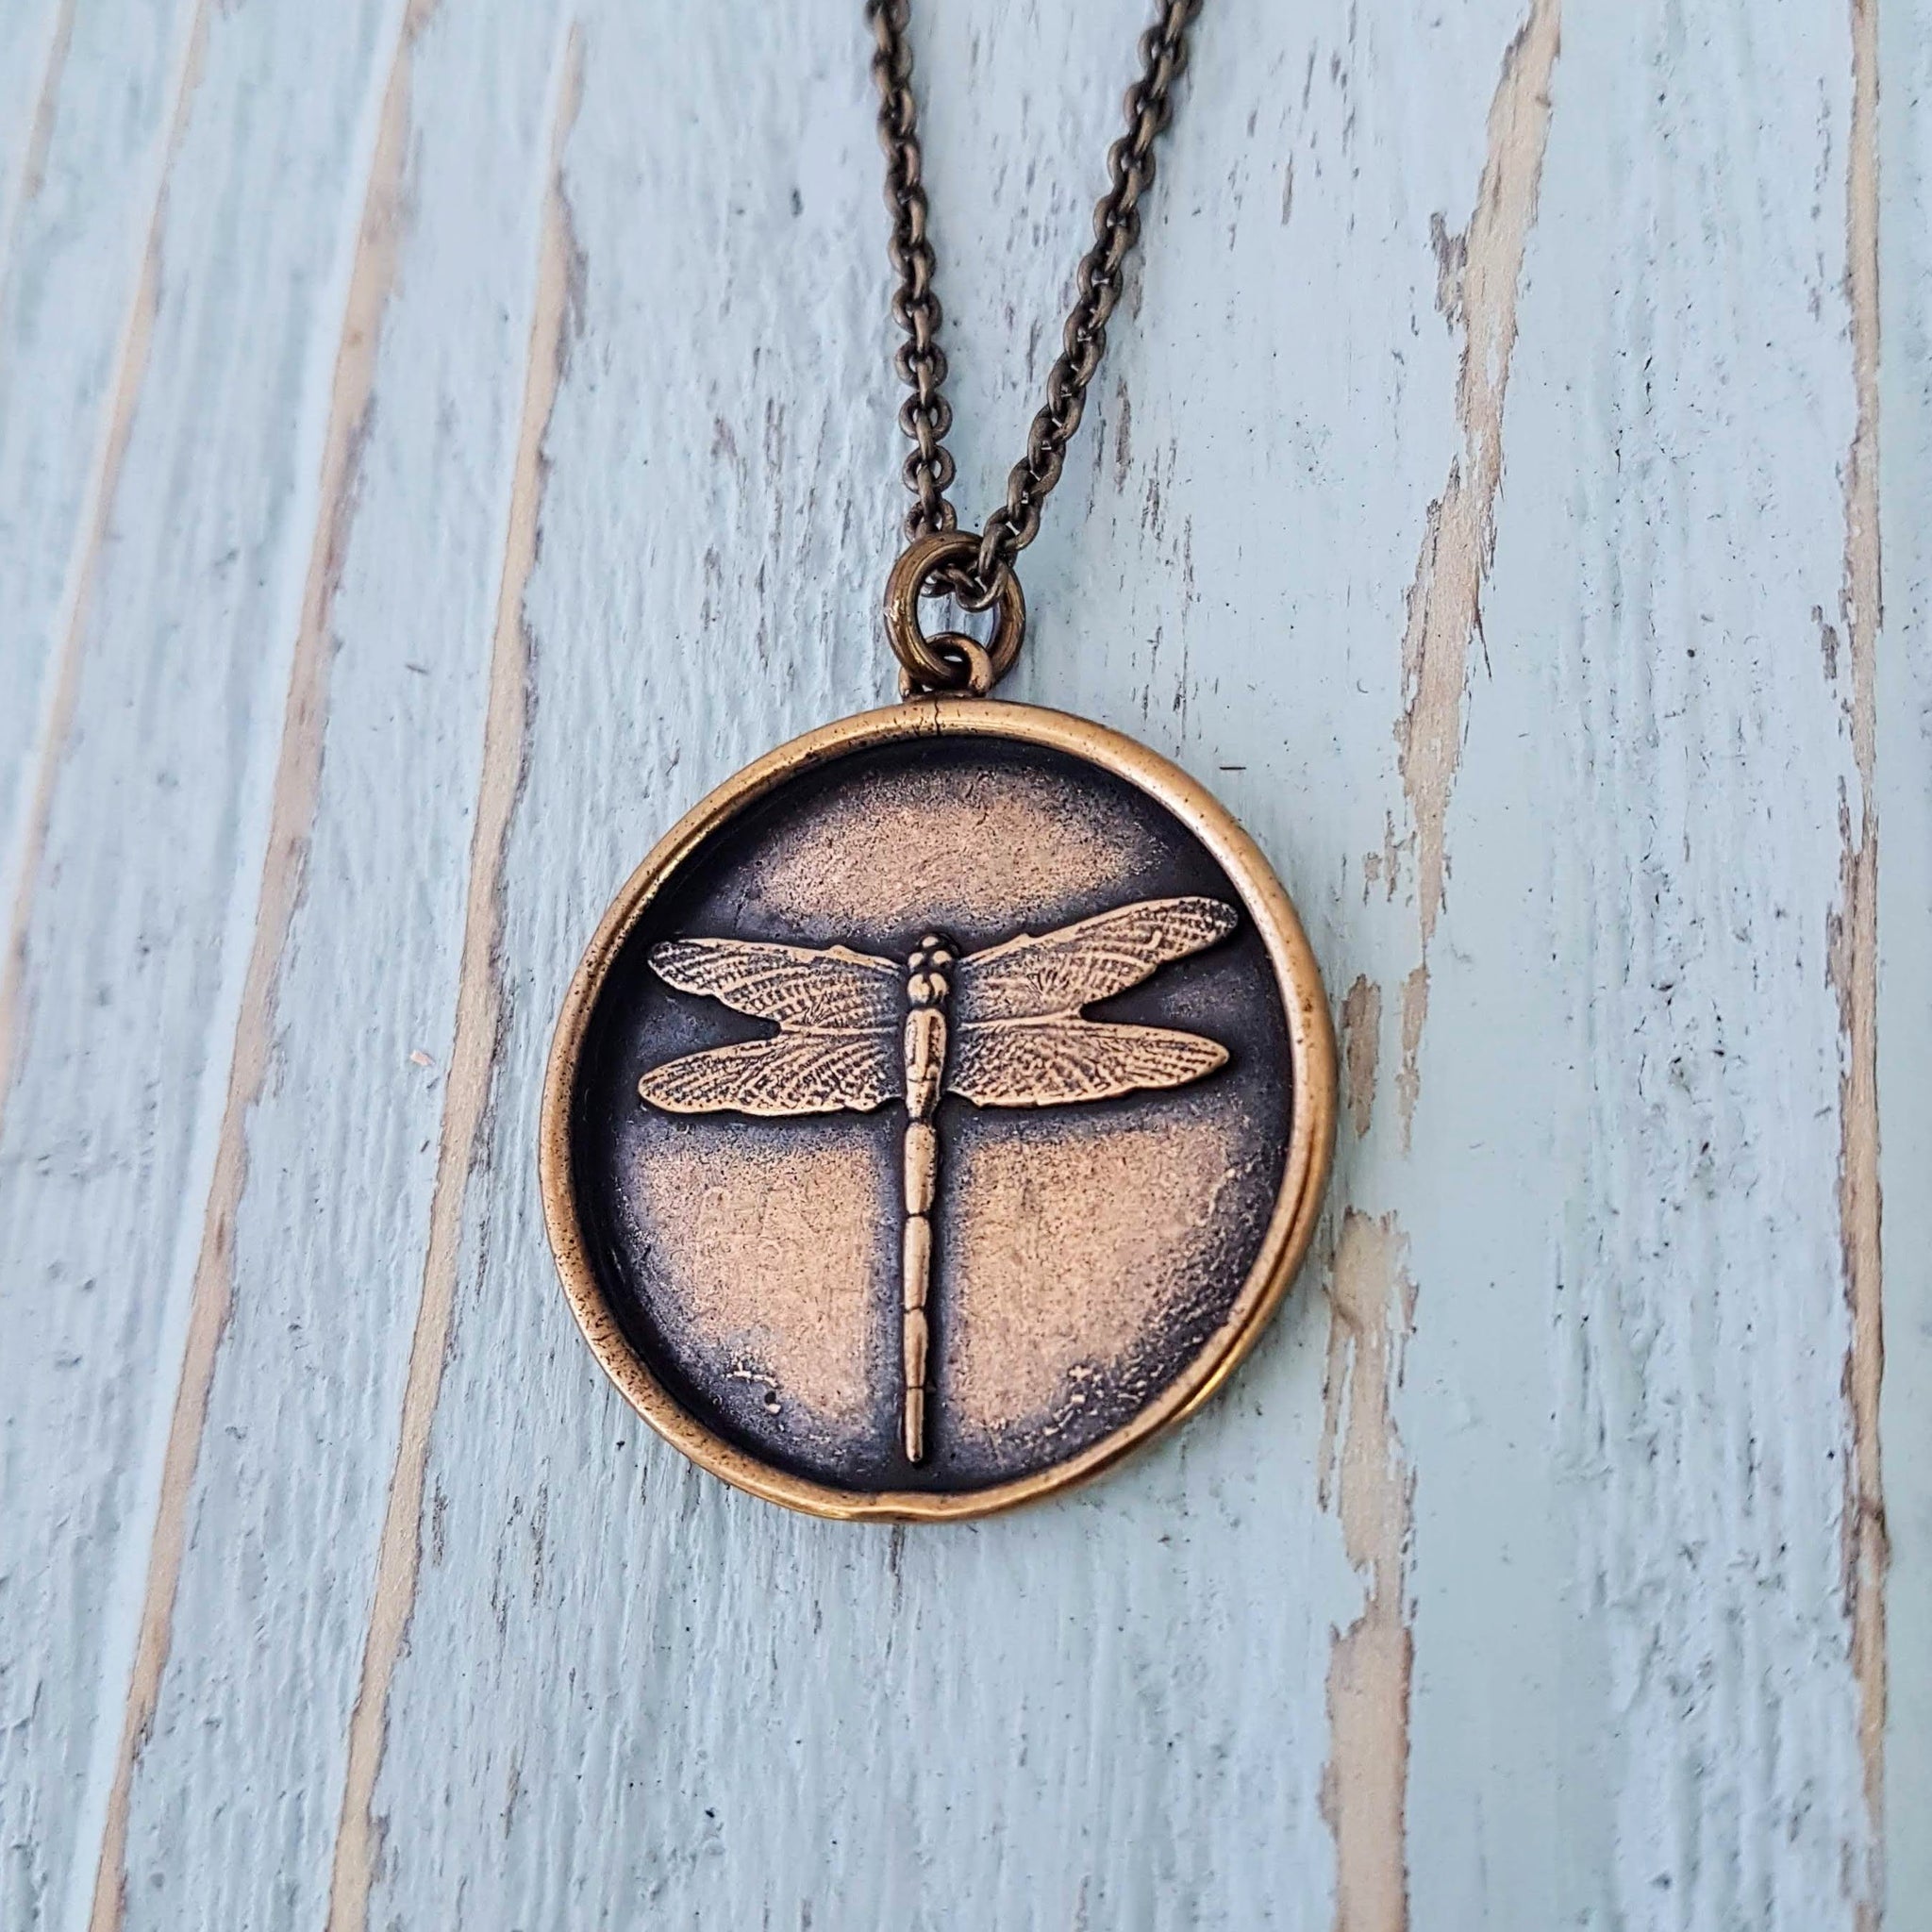 Personalized Gold Necklace, Dragonfly Jewelry, Insect Necklace, Engraved Gift for Mom, Simple Disc Pendant, Round Disc Jewelry Custom Length - Gwen Delicious Jewelry Designs